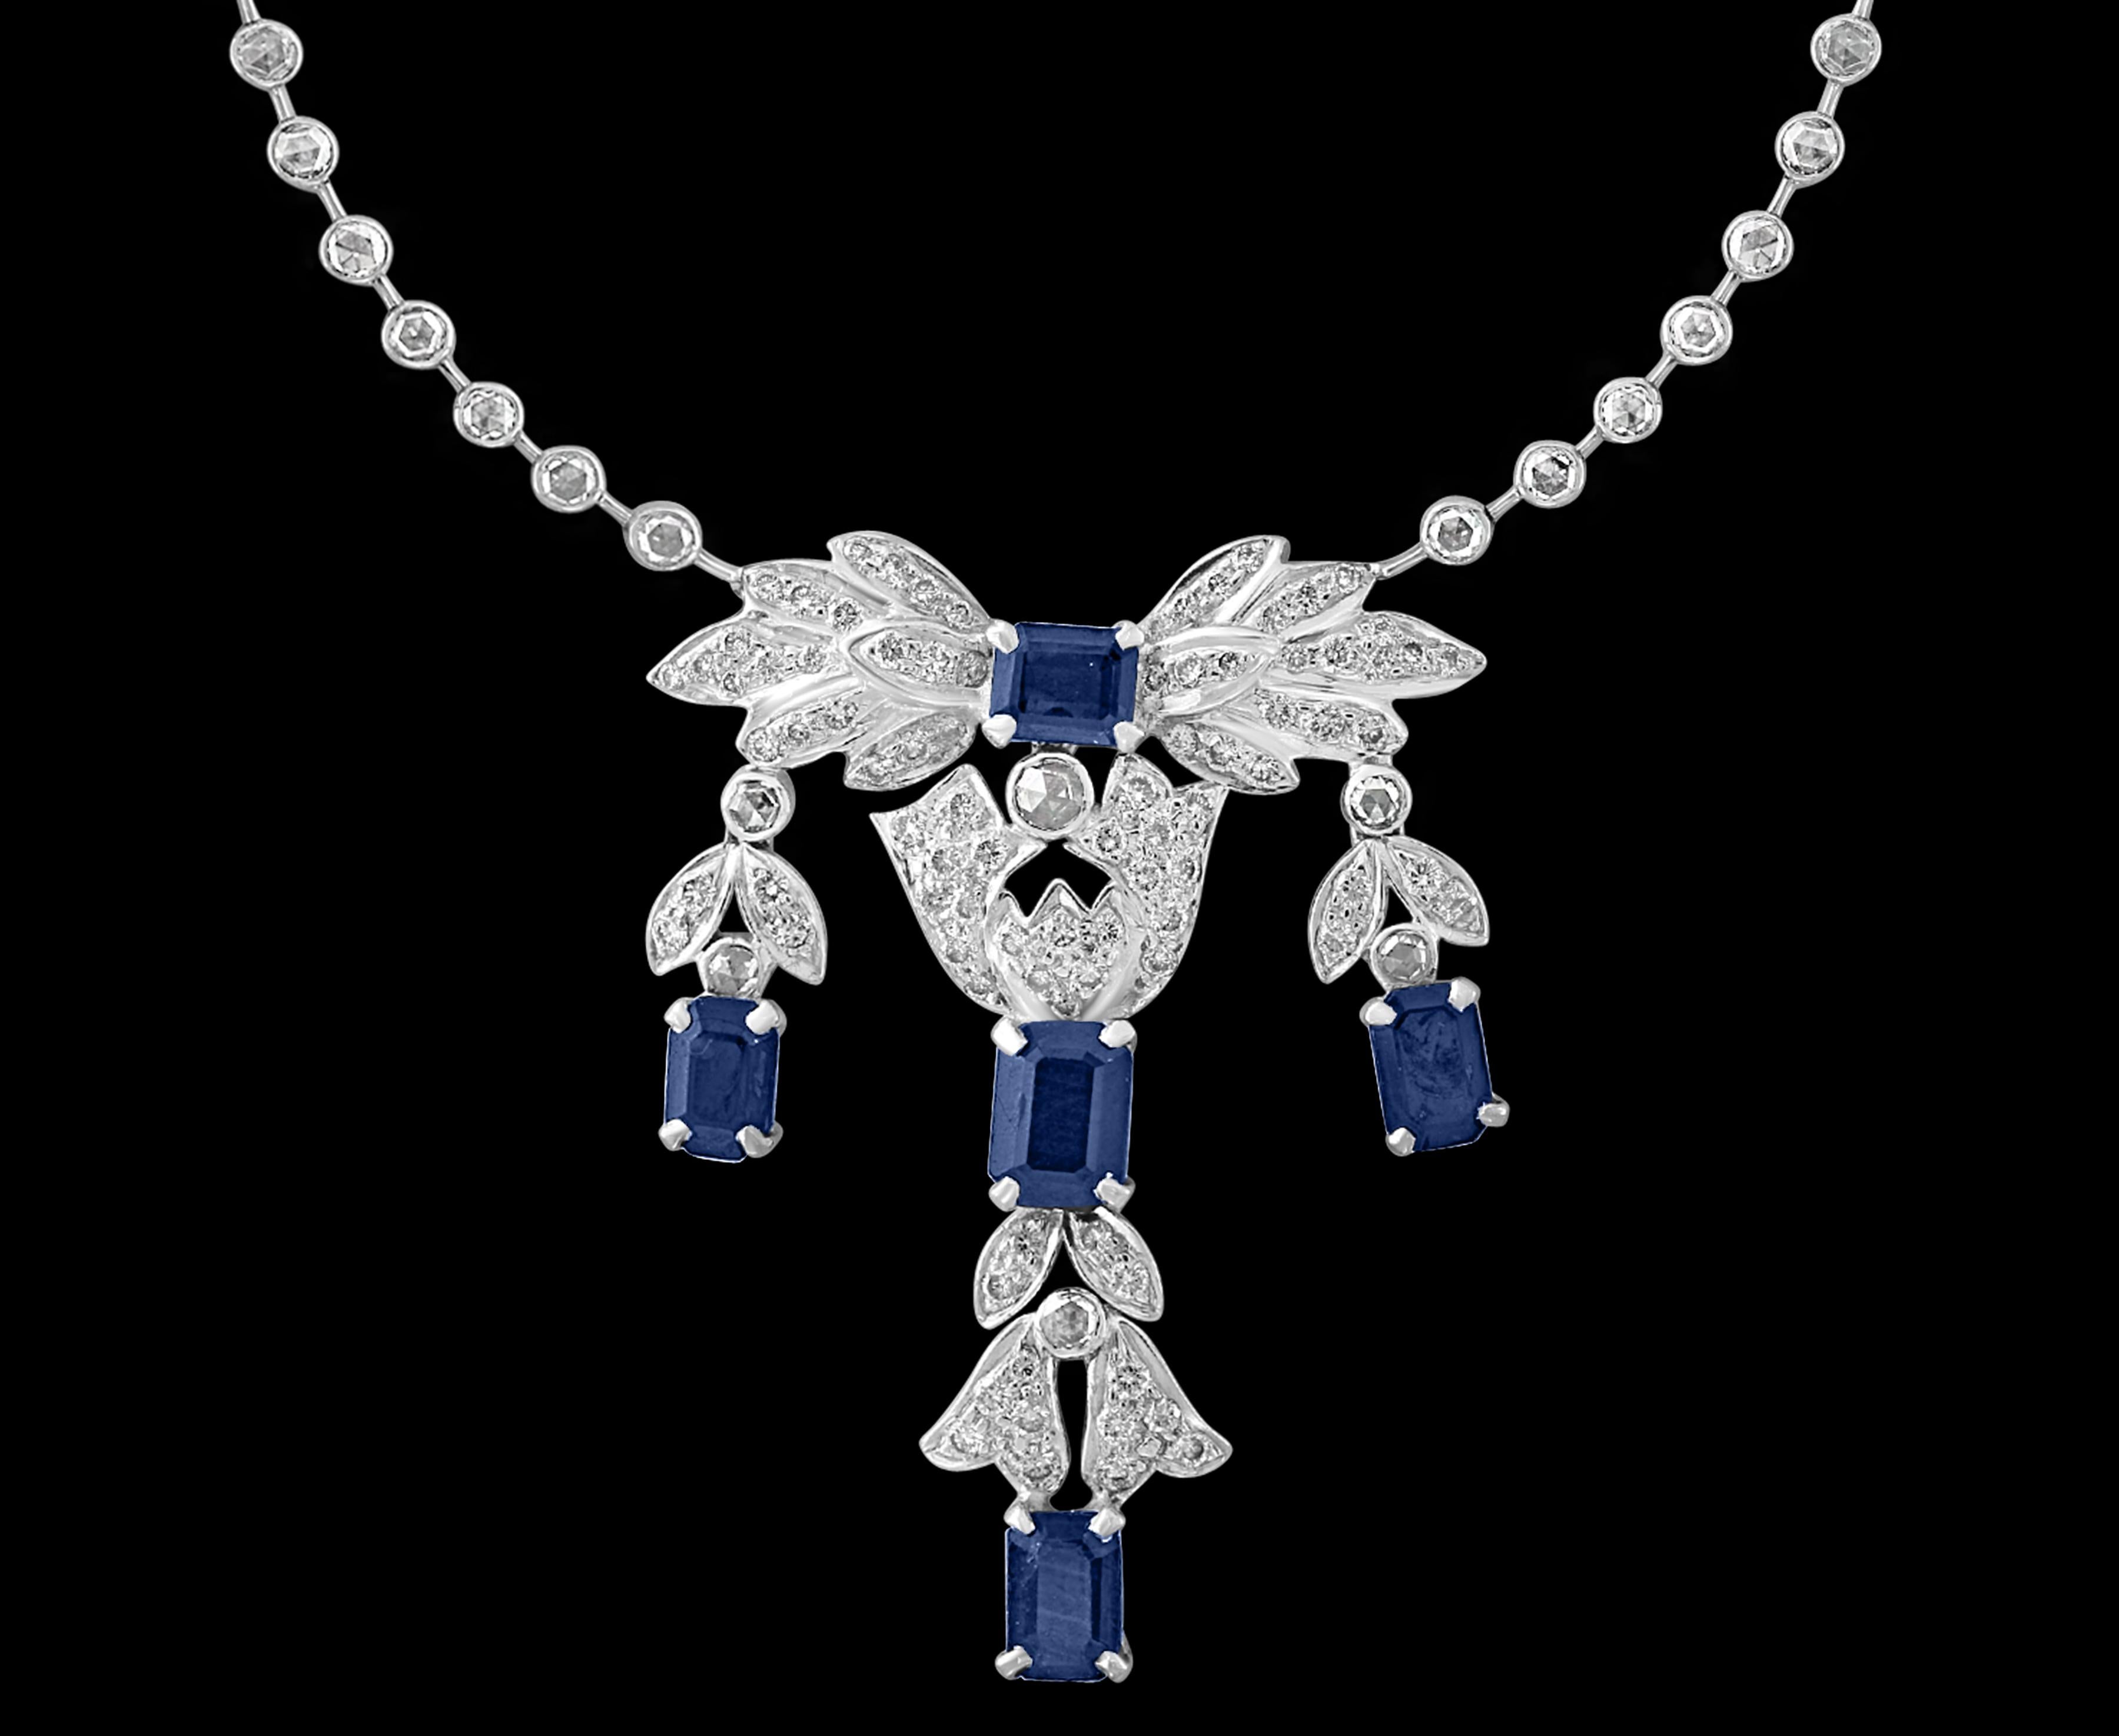 This Necklace and Earrings set is a true masterpiece that showcases the exceptional quality and beauty of natural sapphires and diamonds. The necklace is made out of 18 Karat white gold and consists of 5 emerald cut natural sapphires, with a total